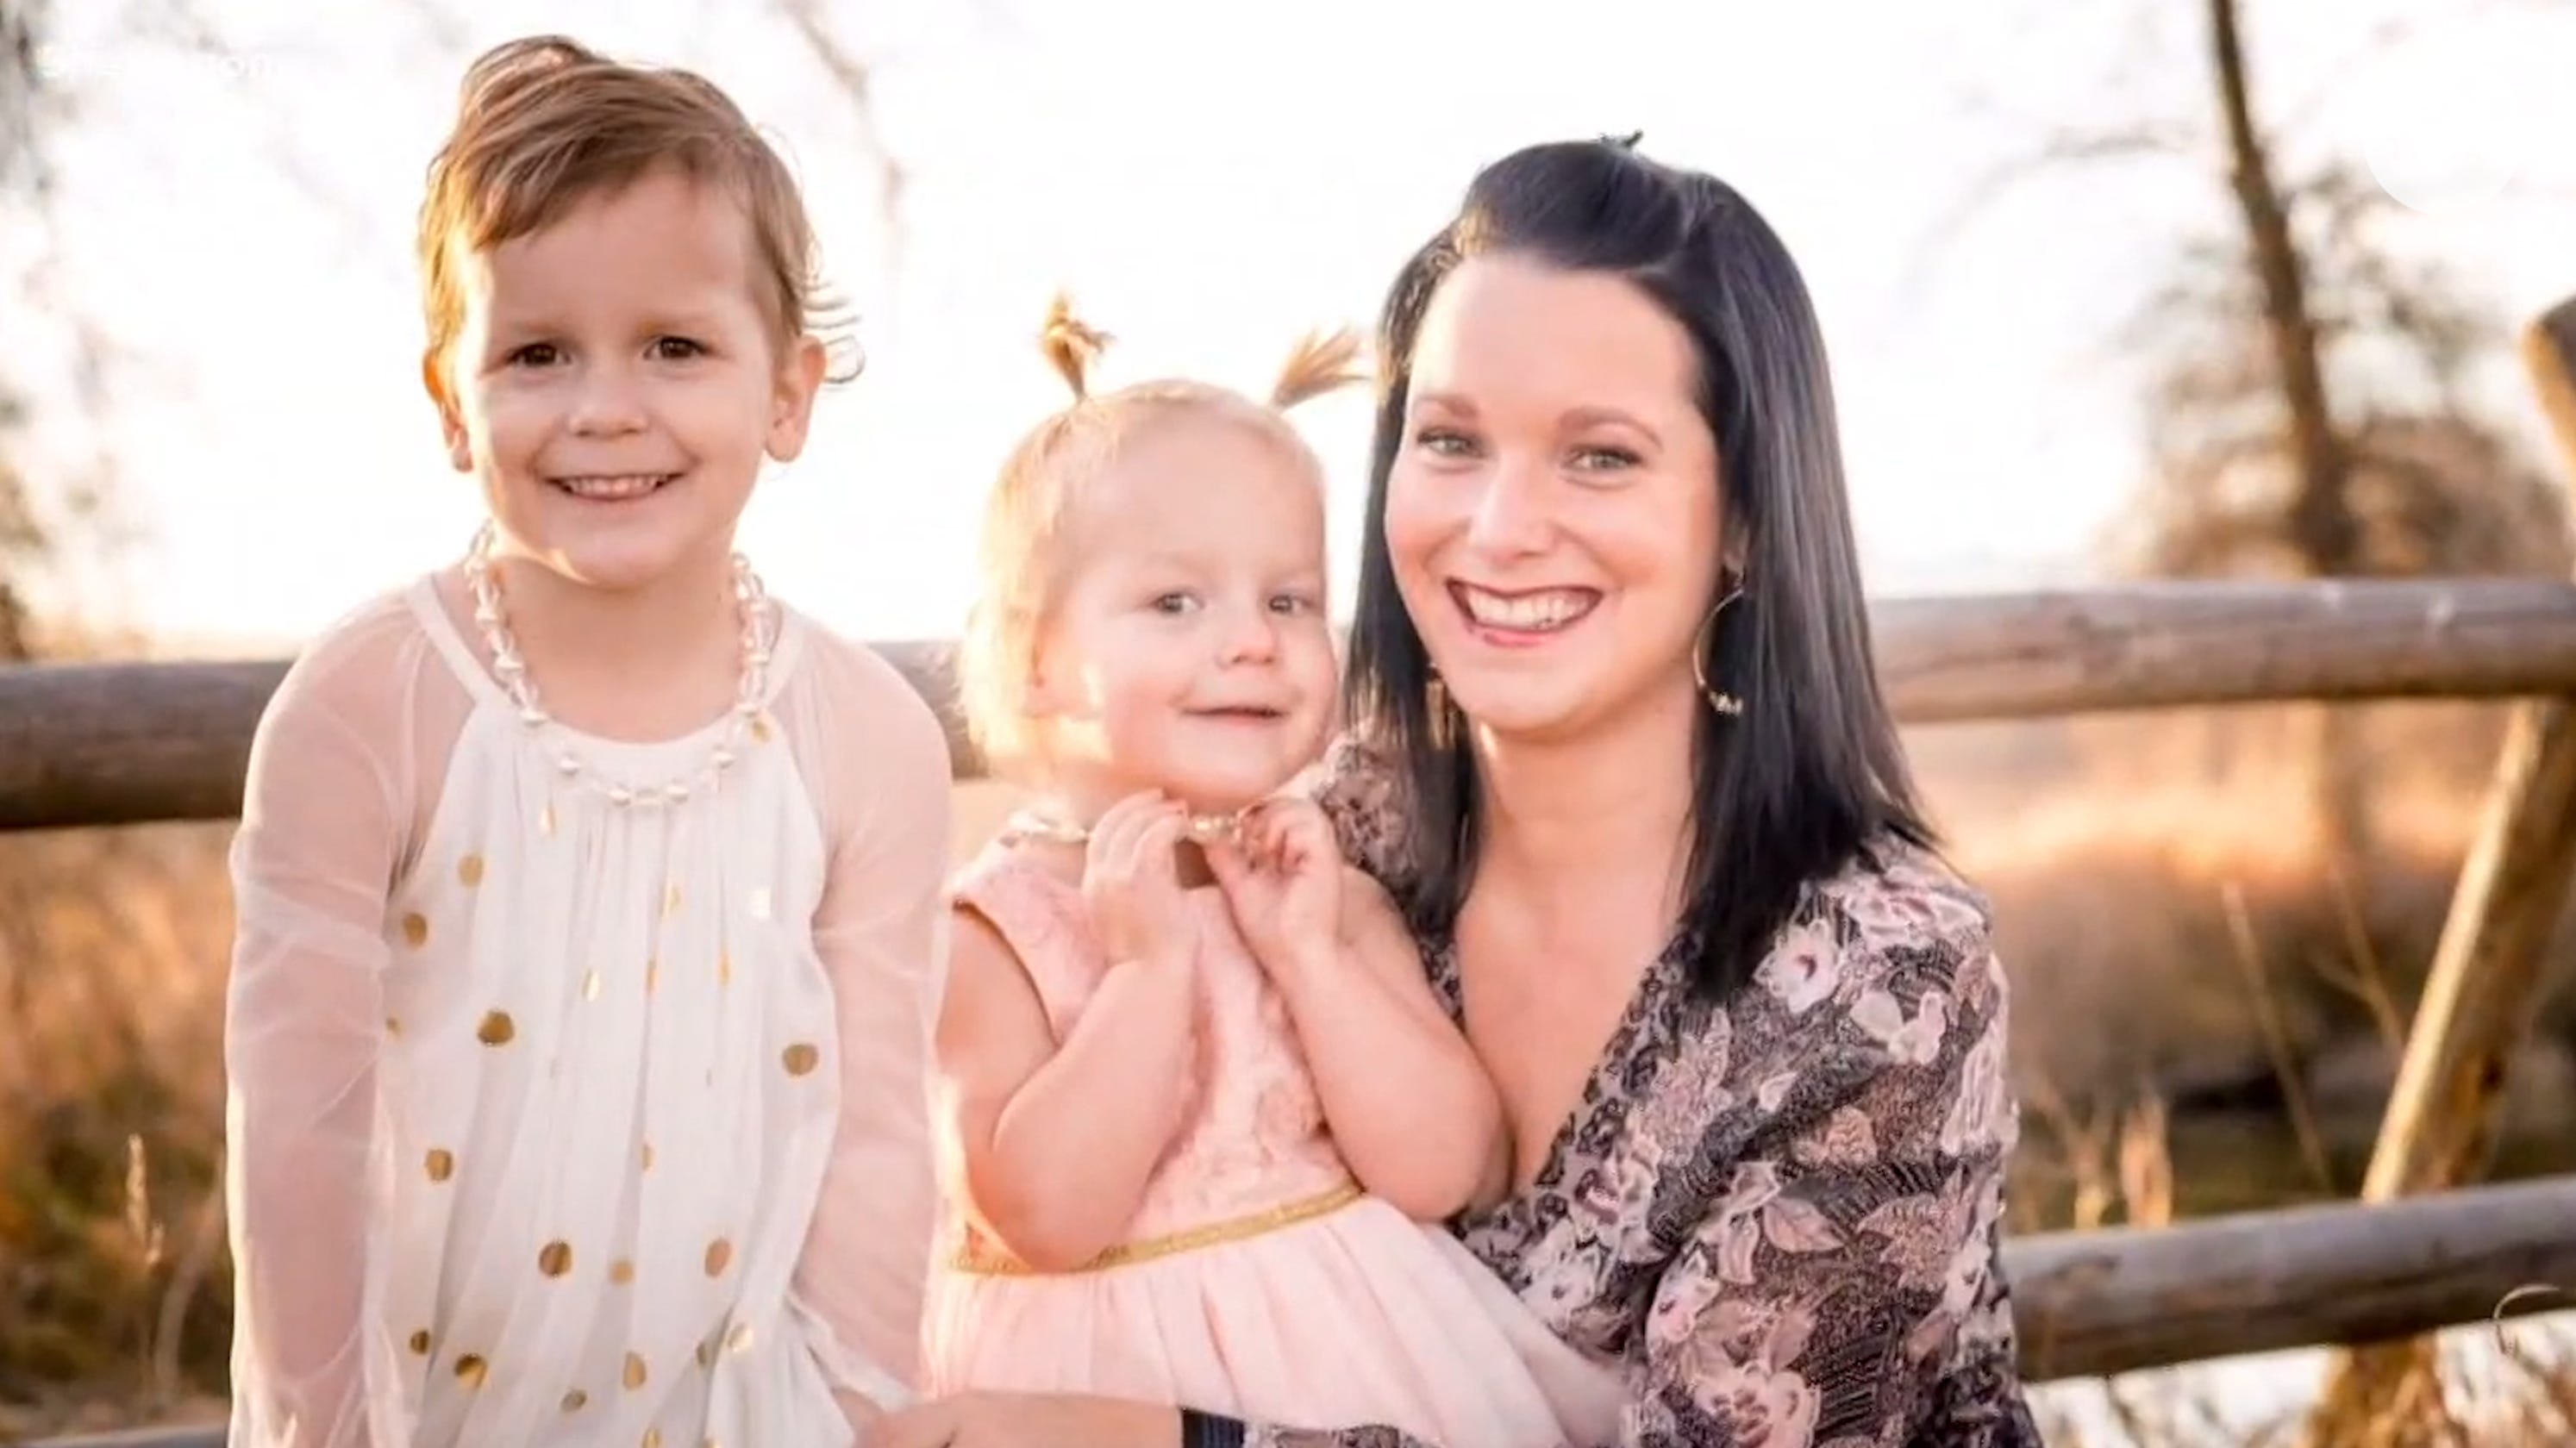 Chris Watts and Shanann Watts: What led to deaths of pregnant wife, kids?2988 x 1680